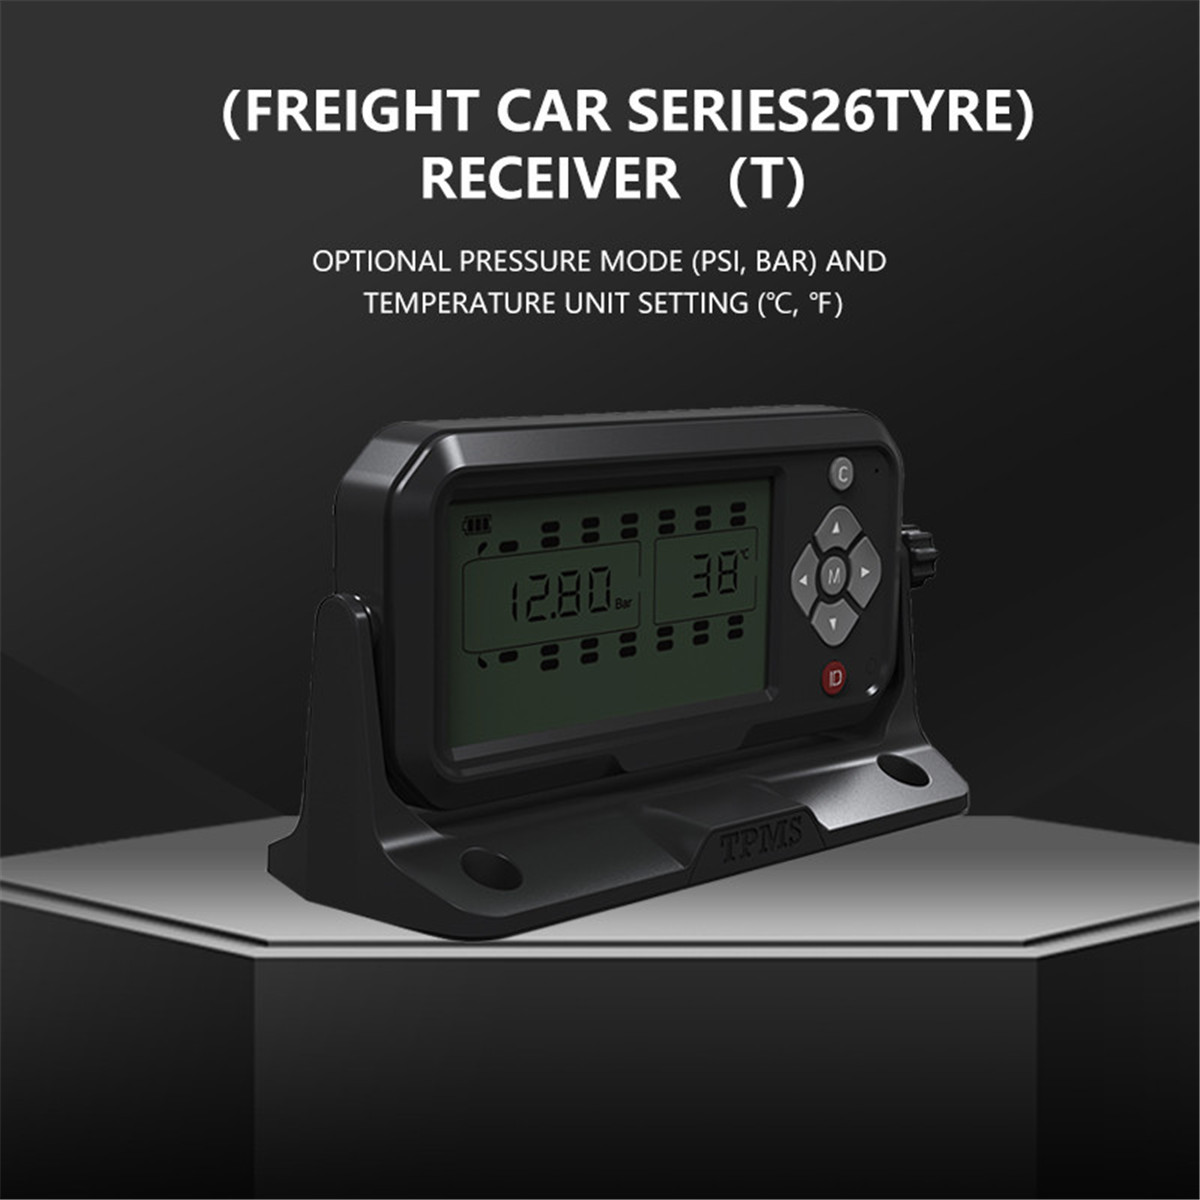 ( Freight car series26tyre) Receiver (9)